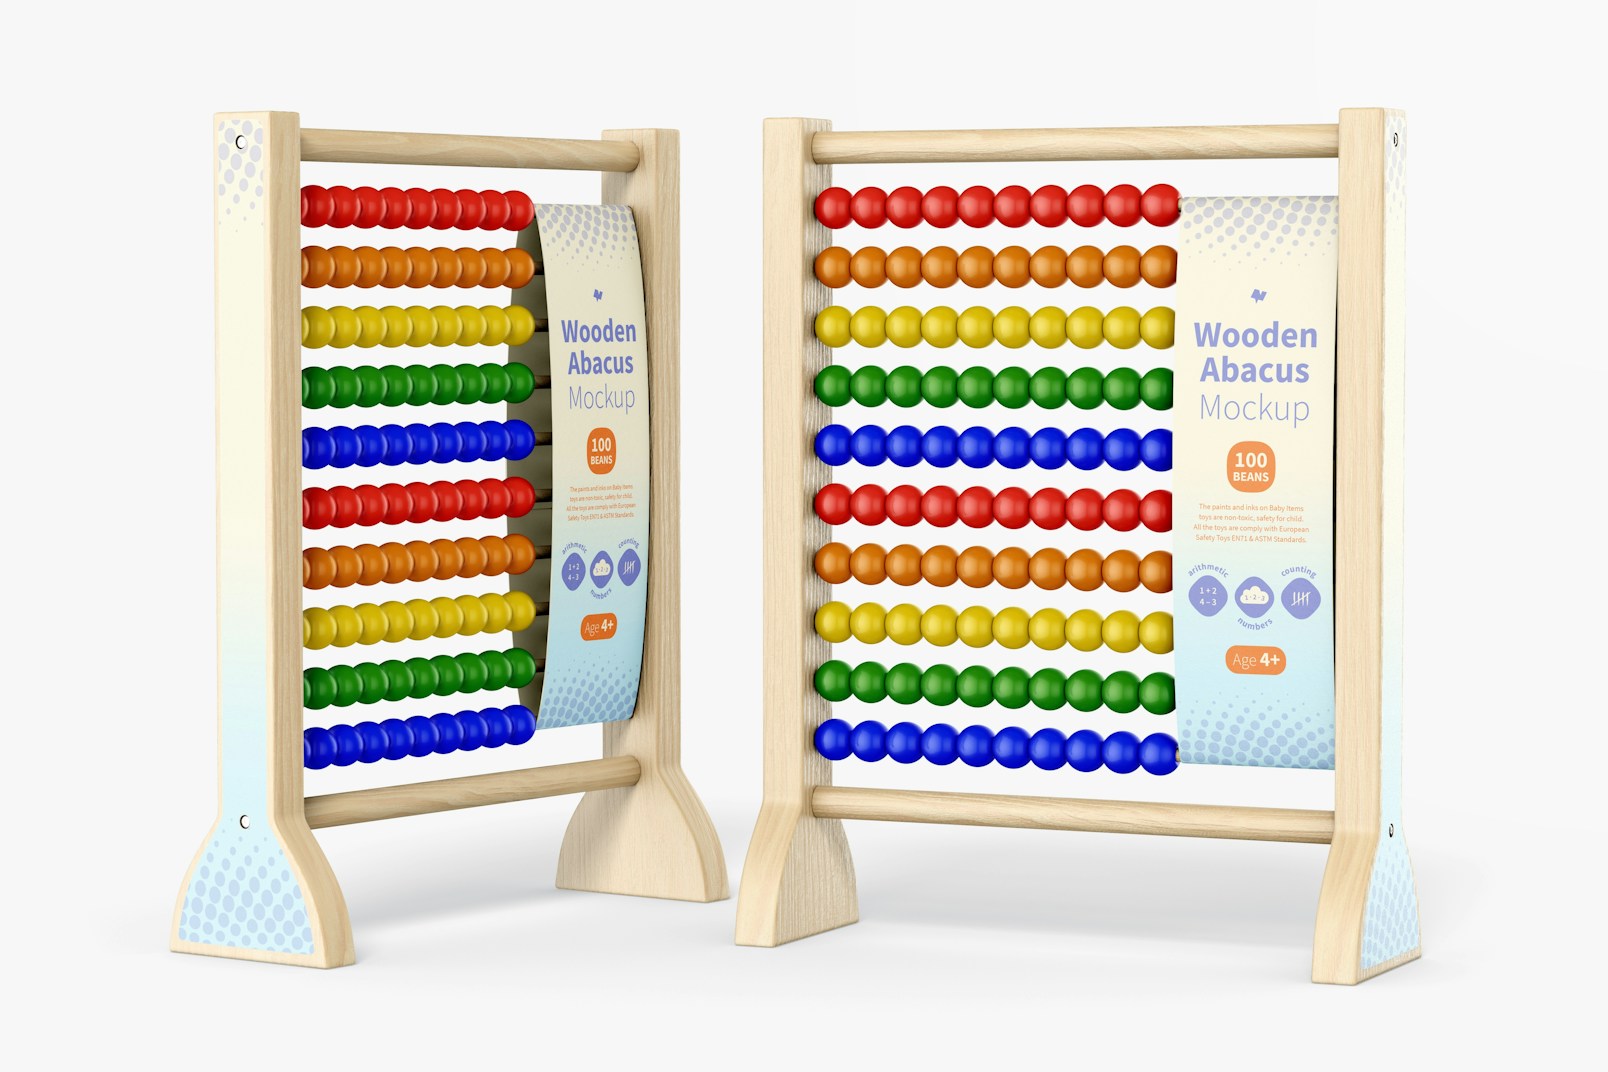 Wooden Abacus Mockup, Perspective